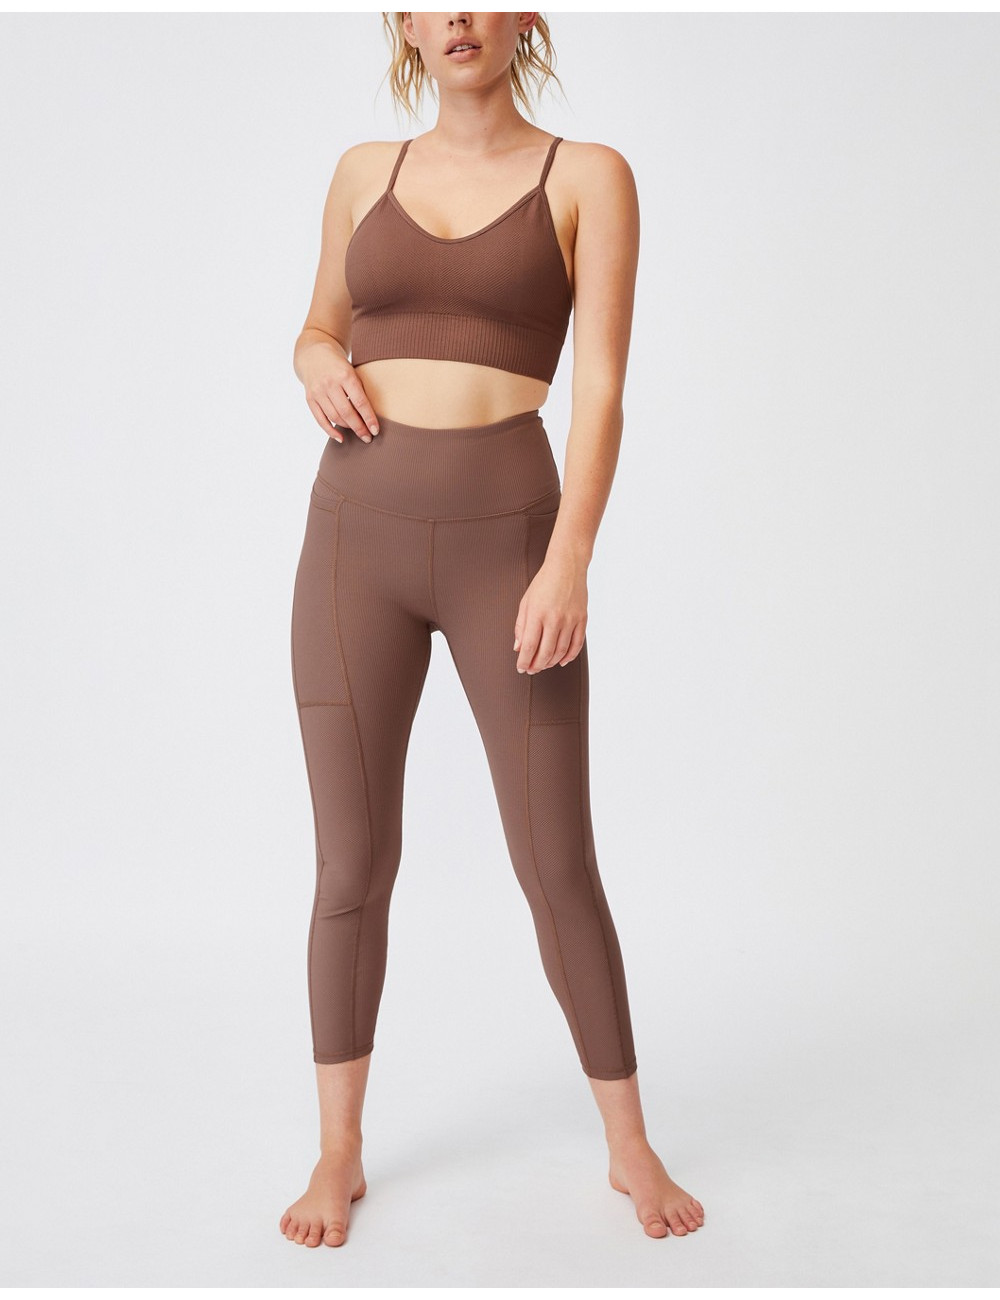 Cotton:On leggings in brown